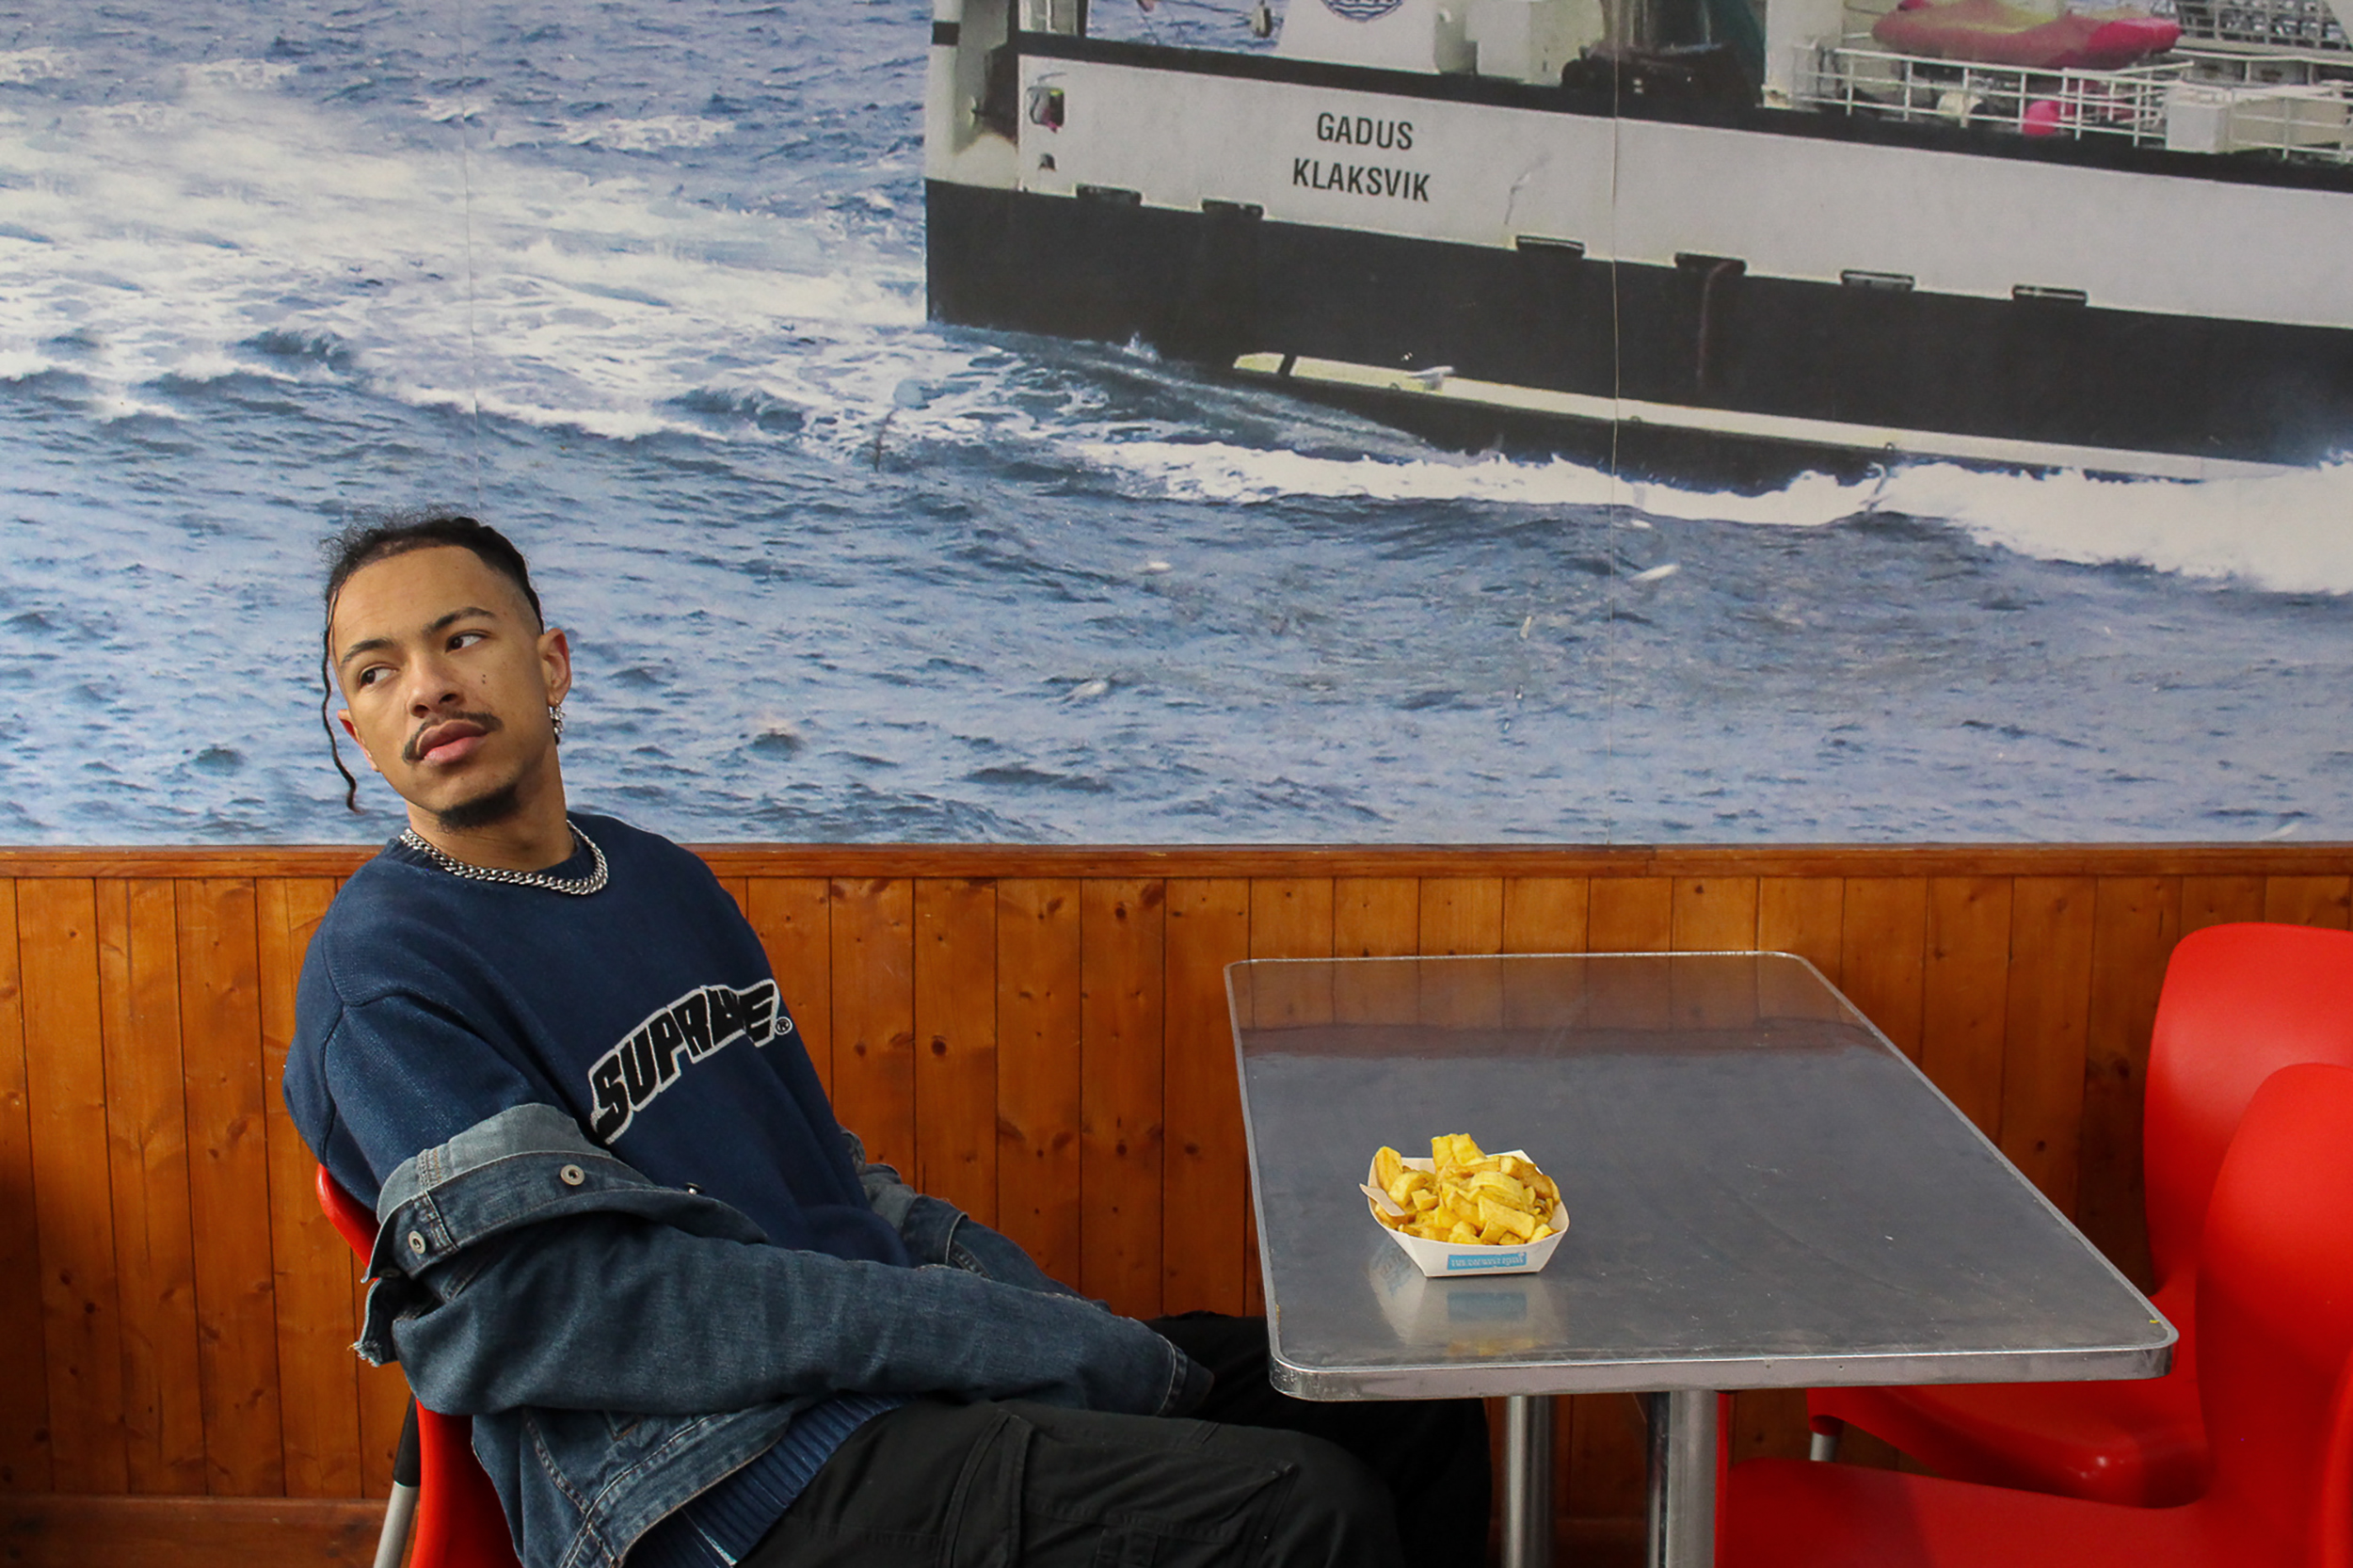 Photography, Styling and Direction by Ellie Parnham of model in fish and chip shop with some chips on the table.